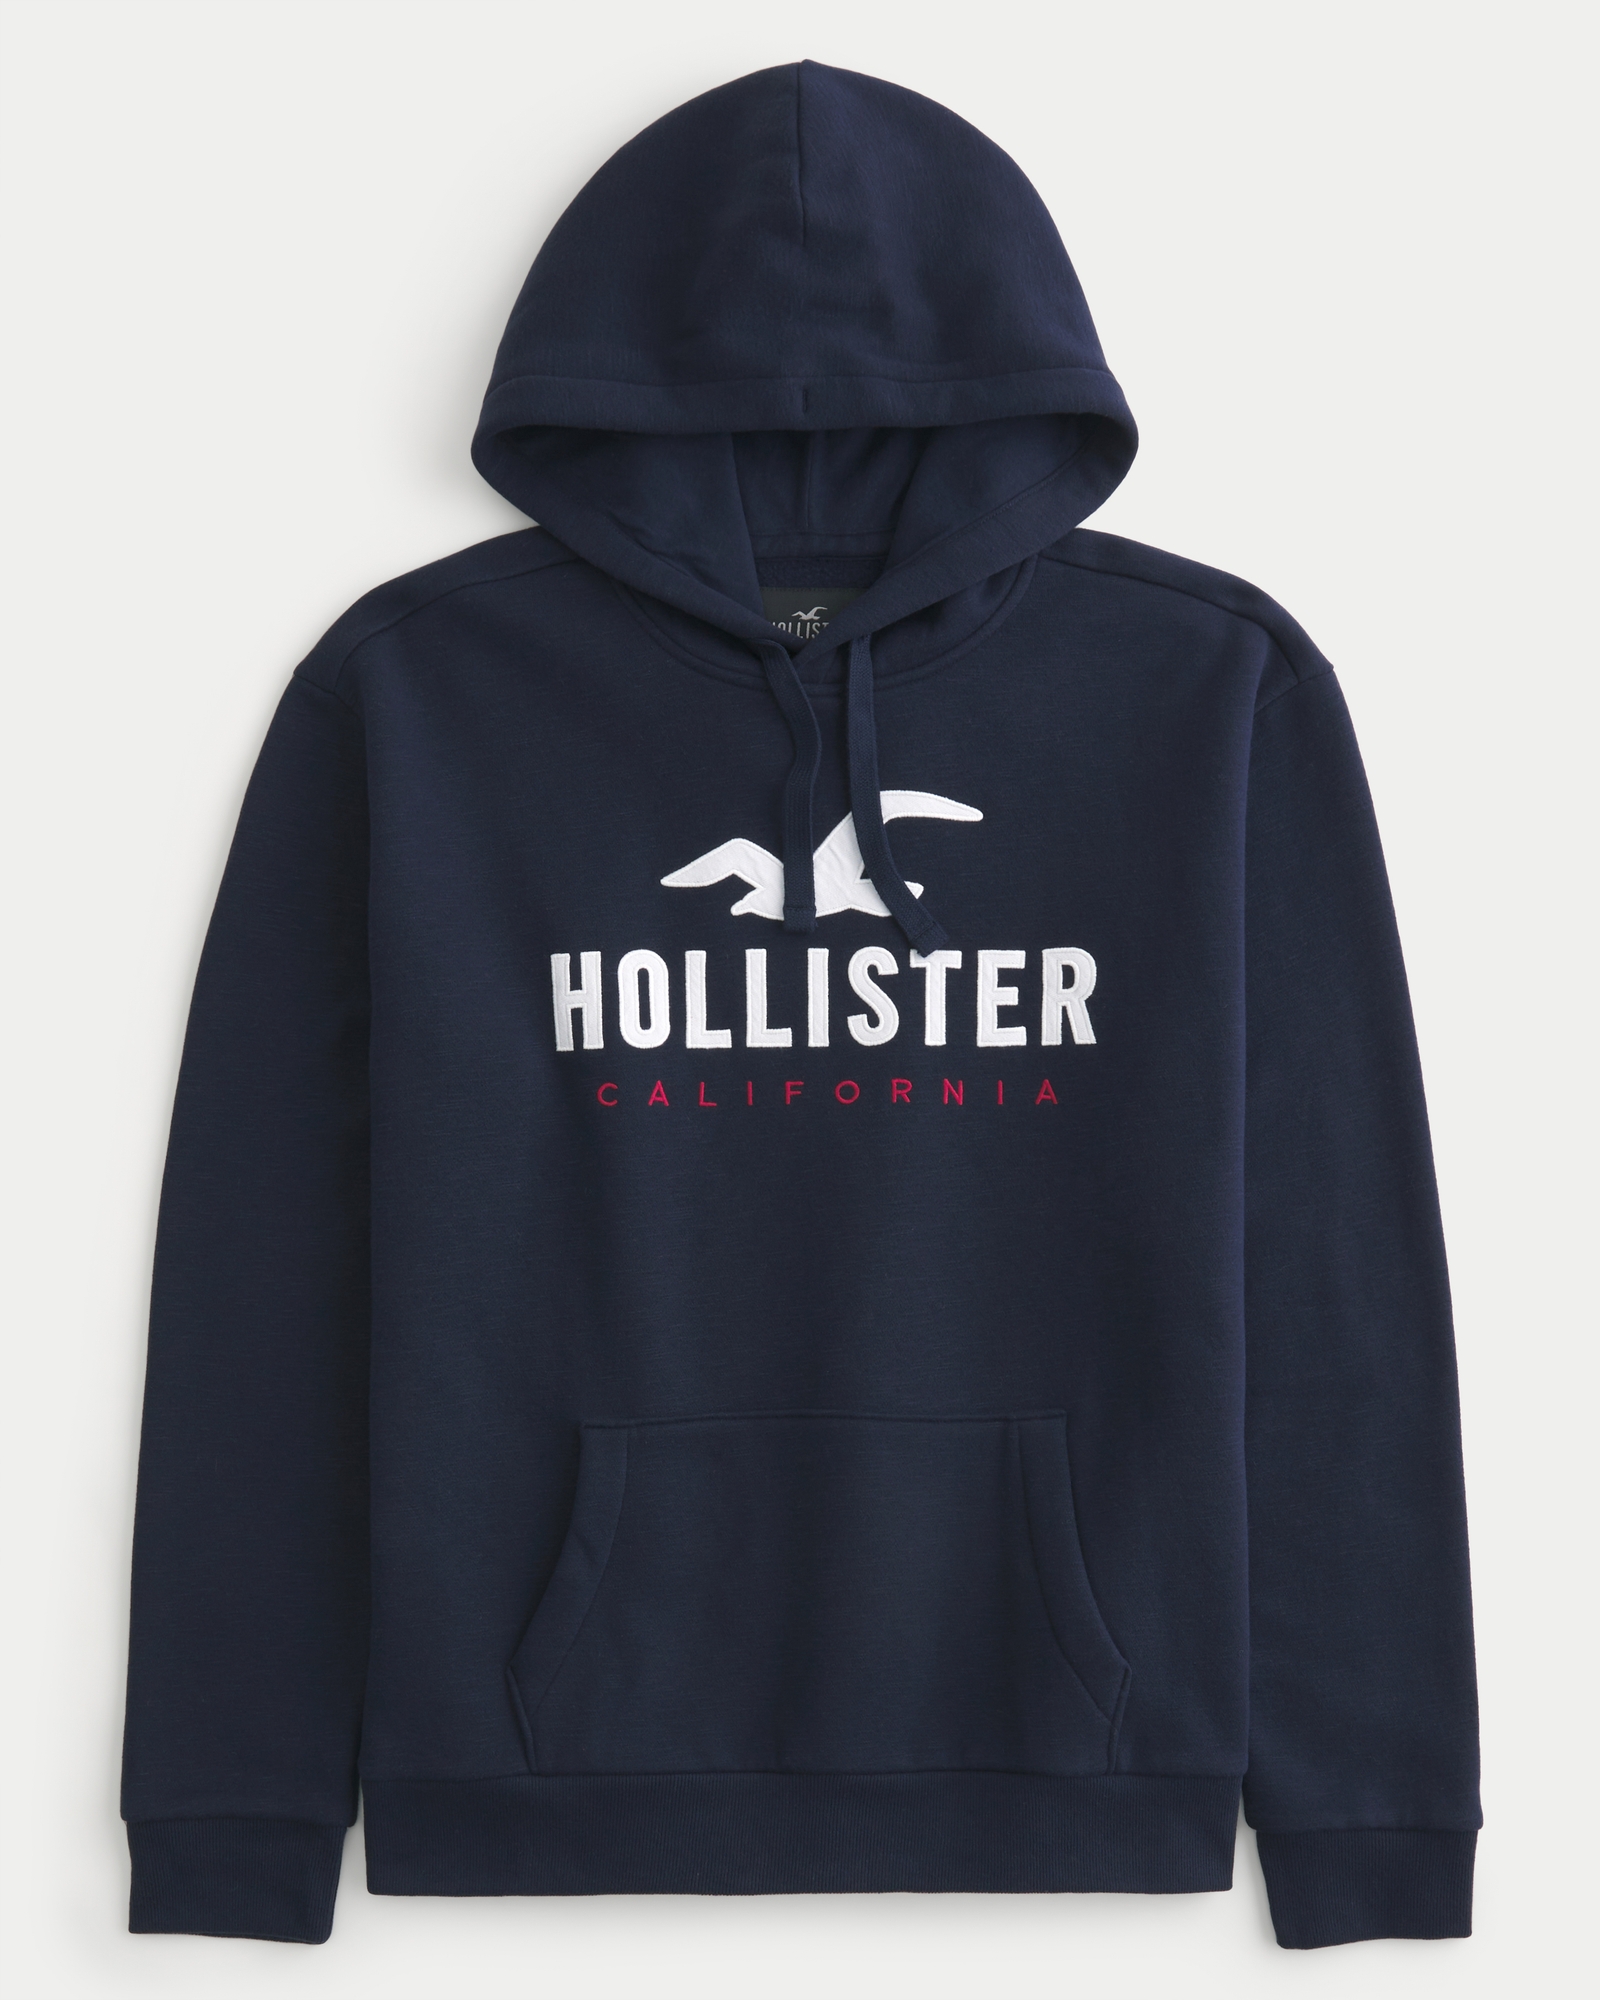 Hollister ombre logo hoodie in gray